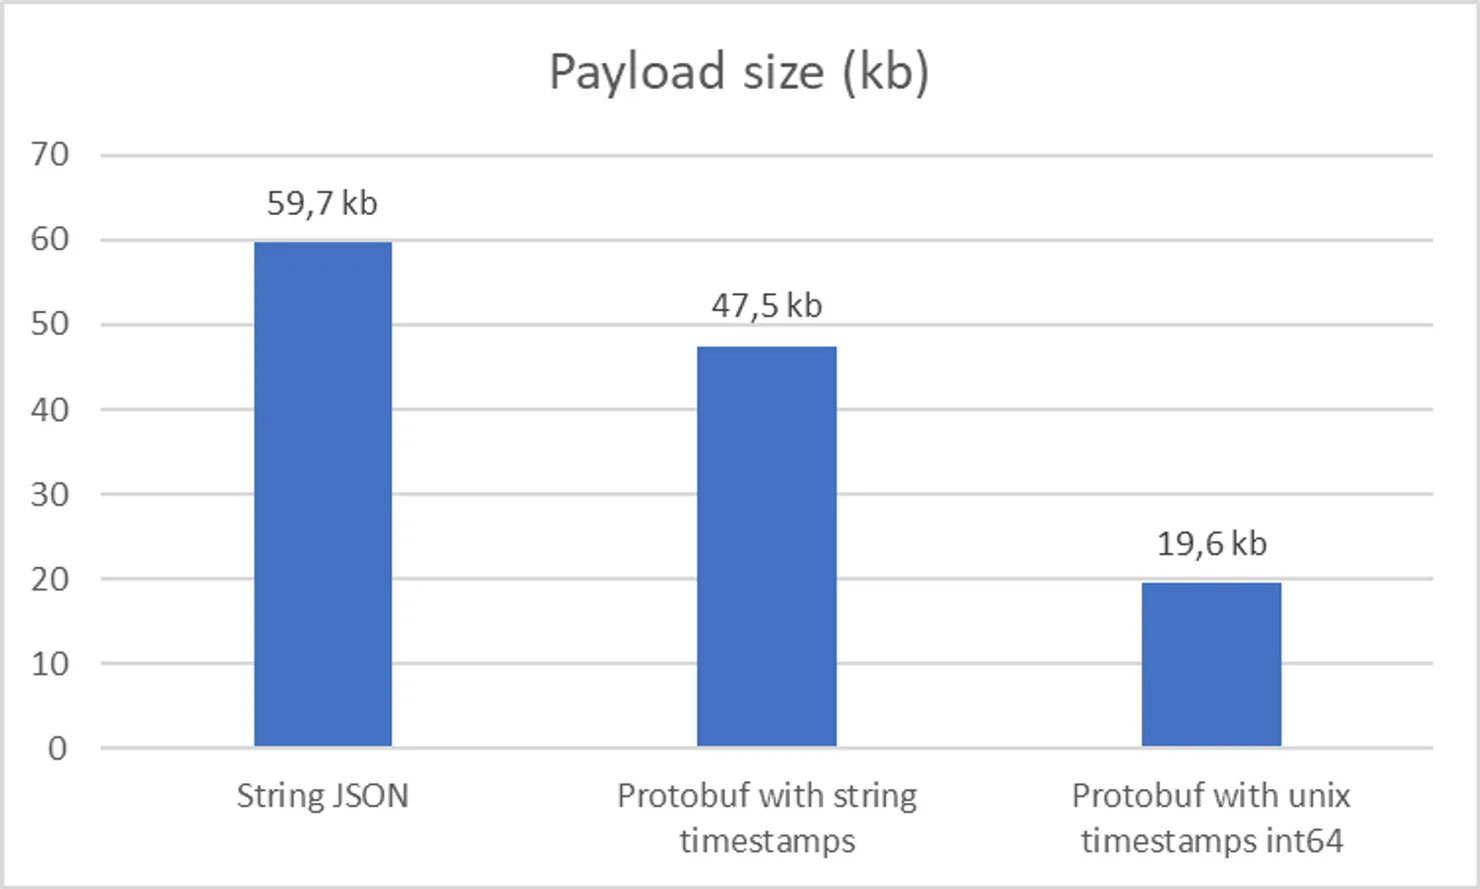 Graph with payload size shows that with an original payload of 59.7kb, the payload using strings in Protobuf with 47.5kb is a 20% decrease and the payload using integers in Protobuf with 19.6kb is a 70% decrease